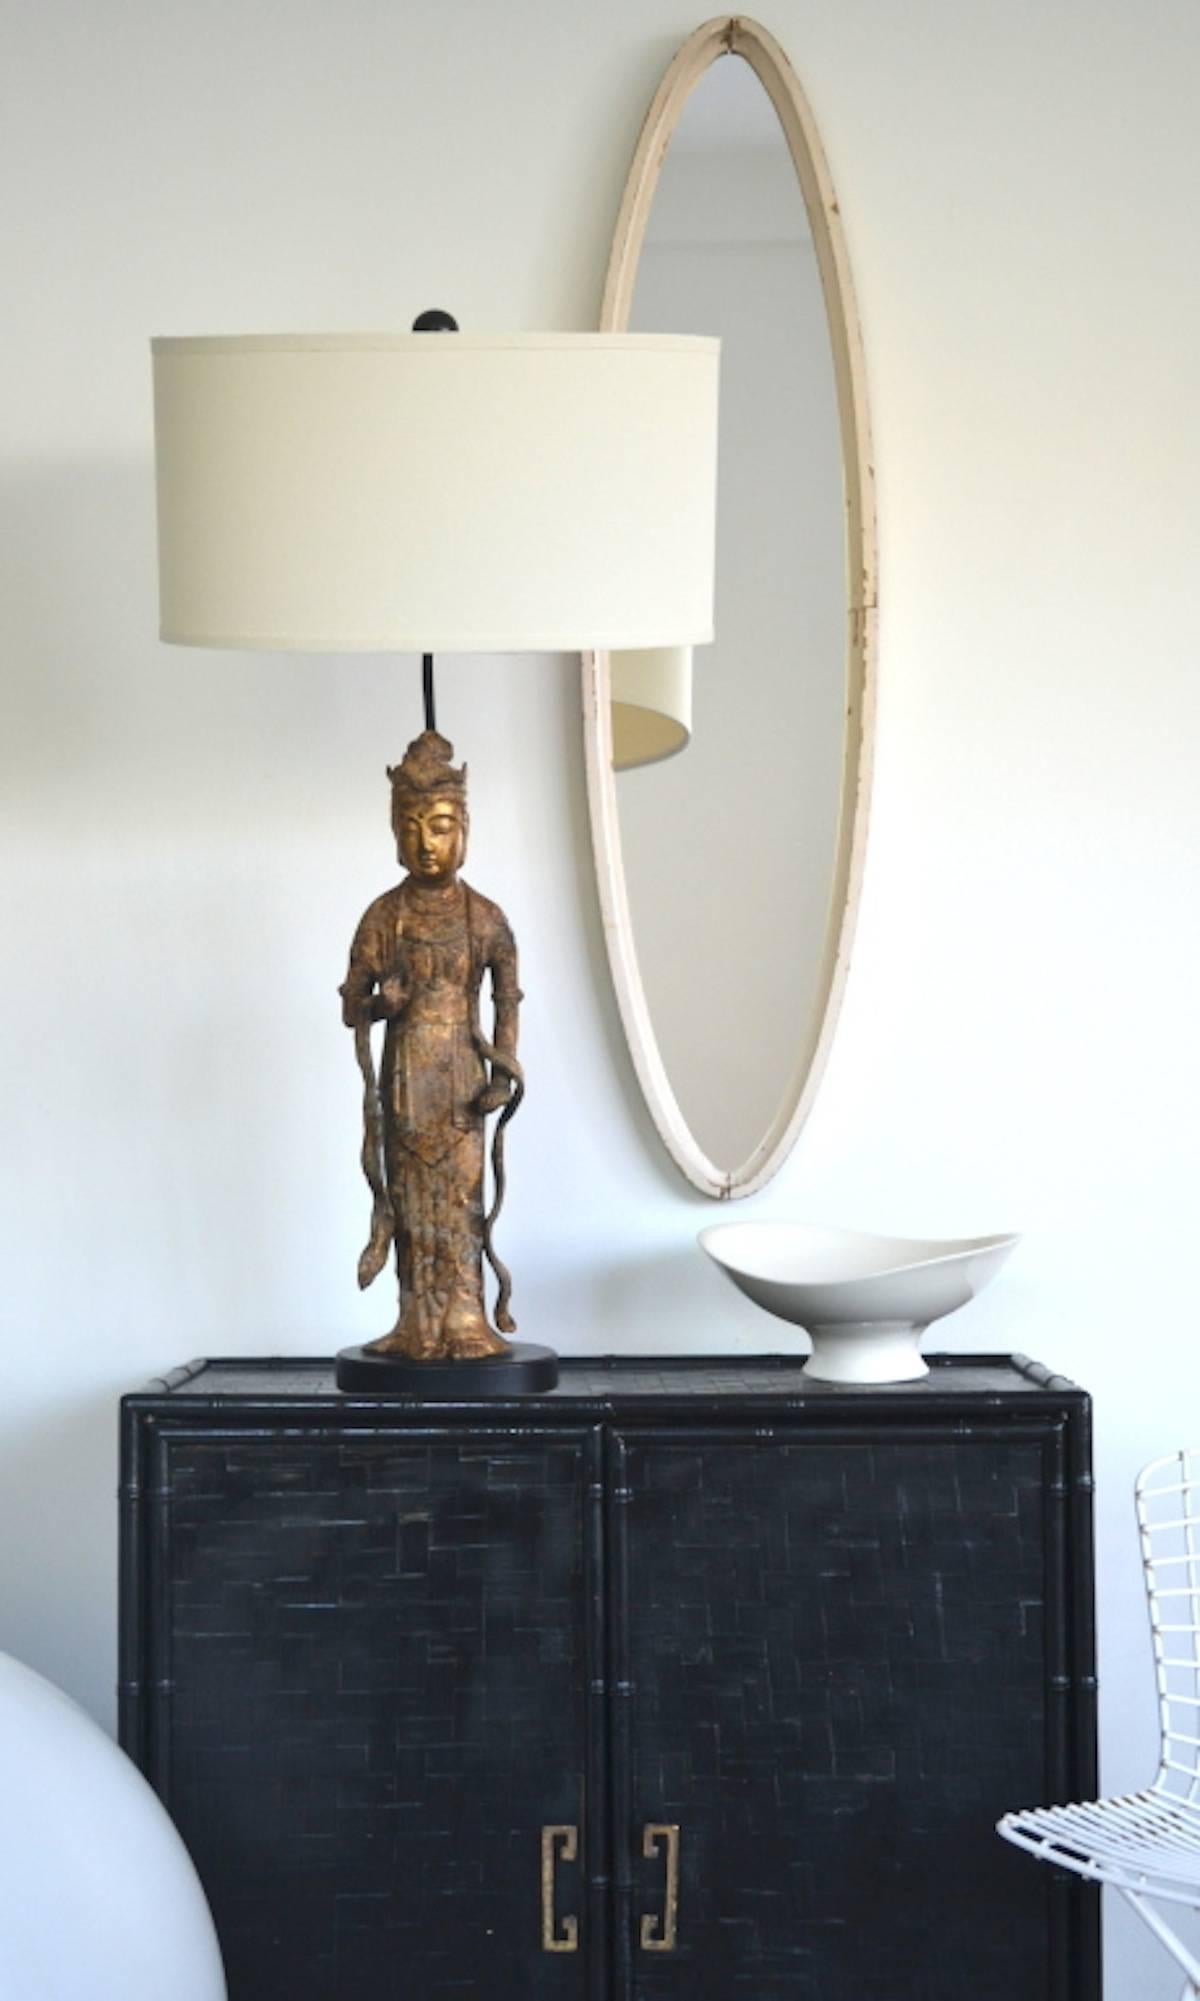 Glamorous Hollywood Regency gilt metal Asian Goddess figural form table lamp, circa 1940s-1950s. This stunning highly decorative lamp is mounted on an ebonized base and wired with brass fittings. Shade not included.
Measurements: The overall height